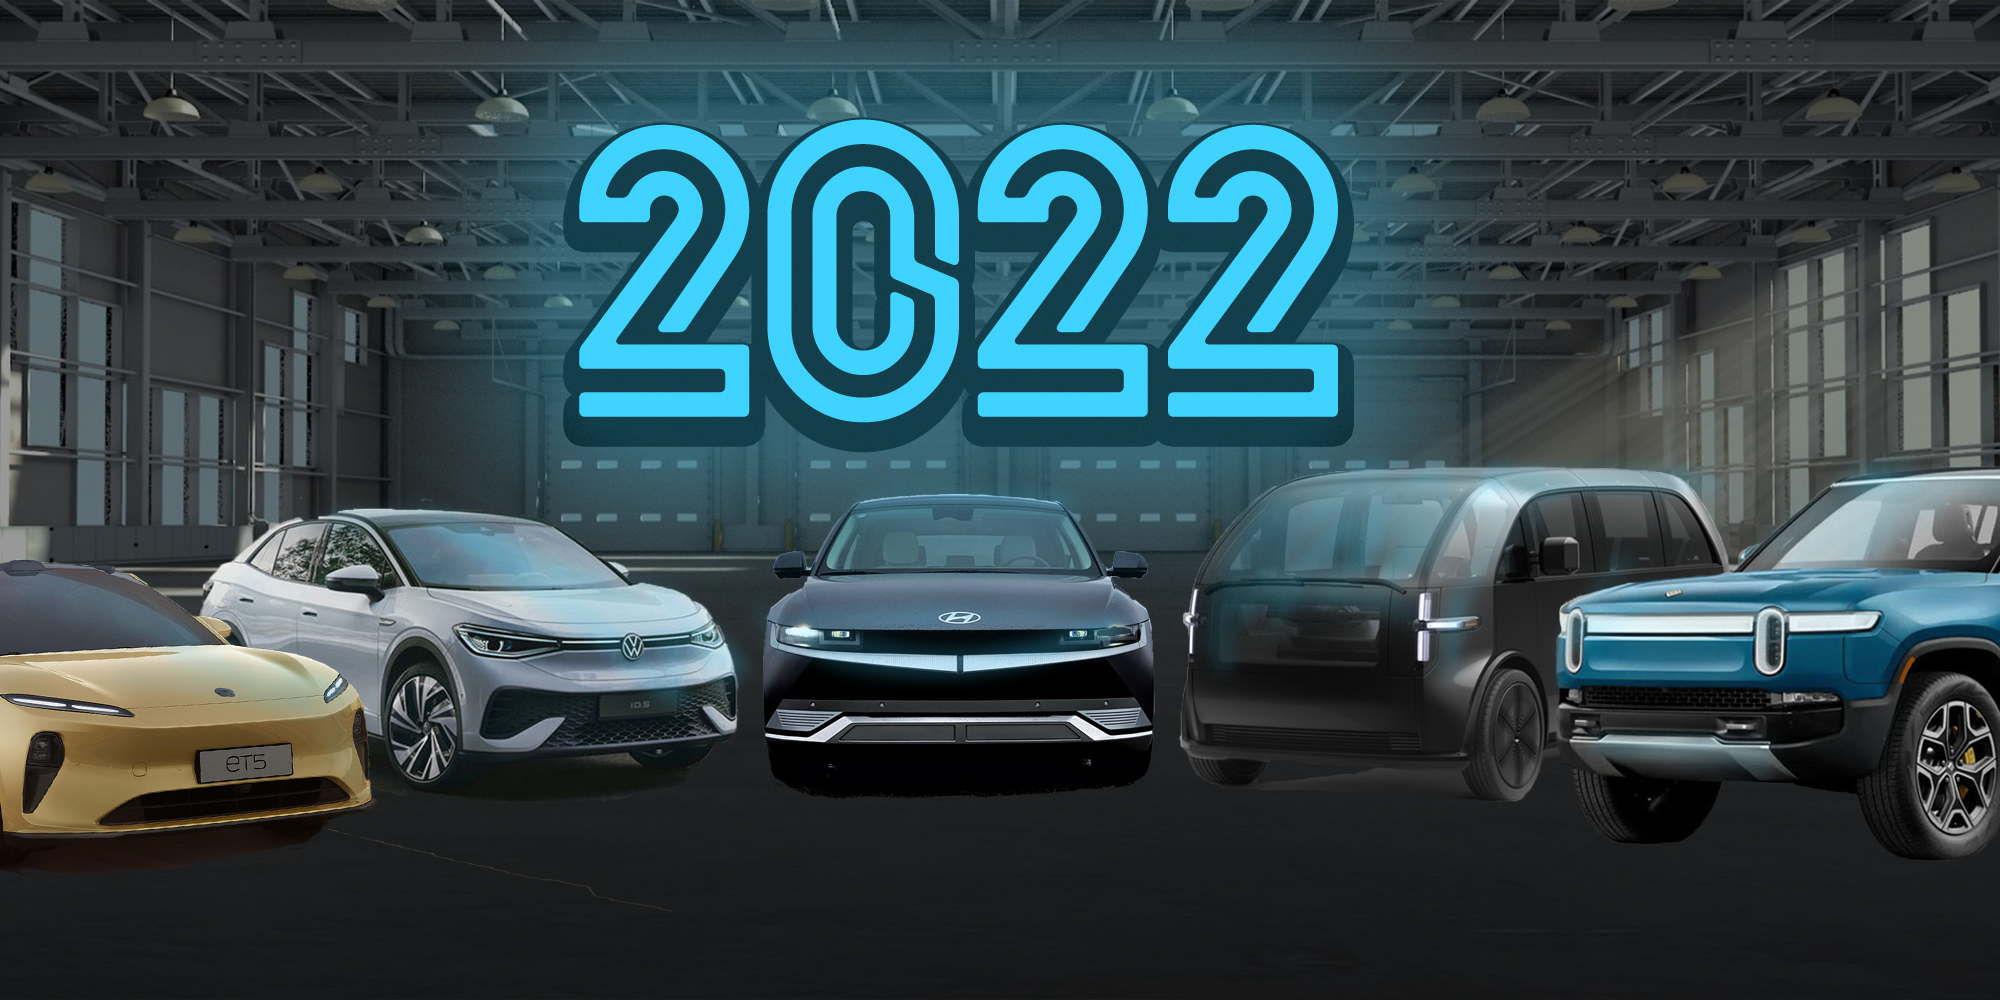 2023 Electric Cars: 7 Incredible New EVs Launching Soon - History